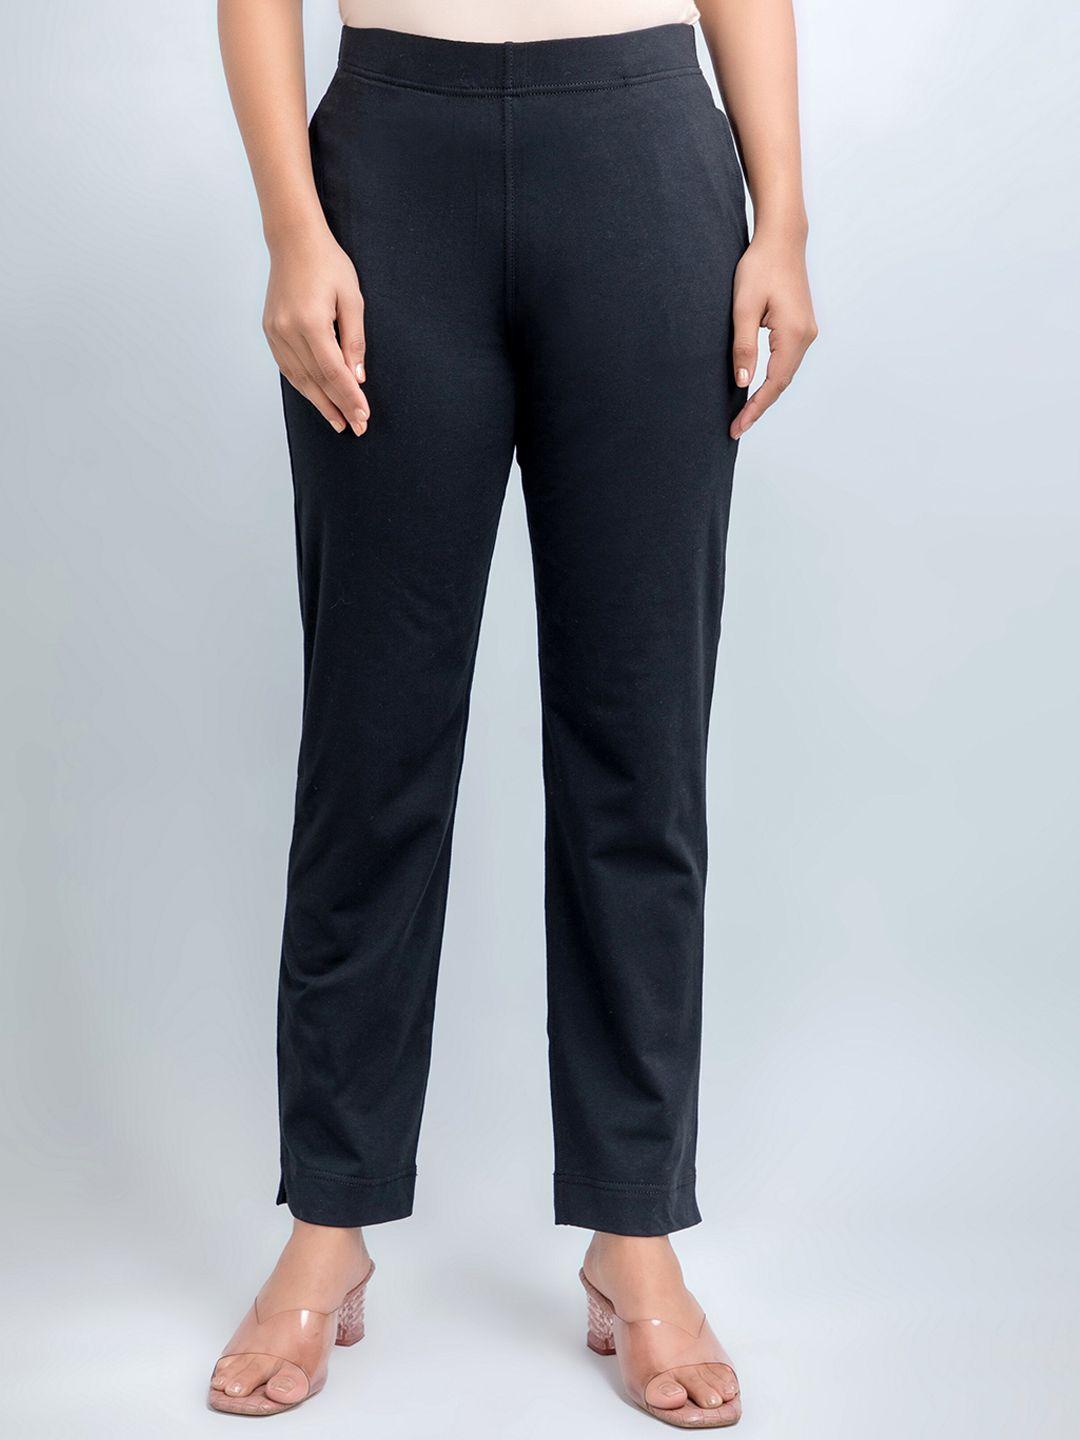 fabglobal women slim fit mid-rise cotton trousers